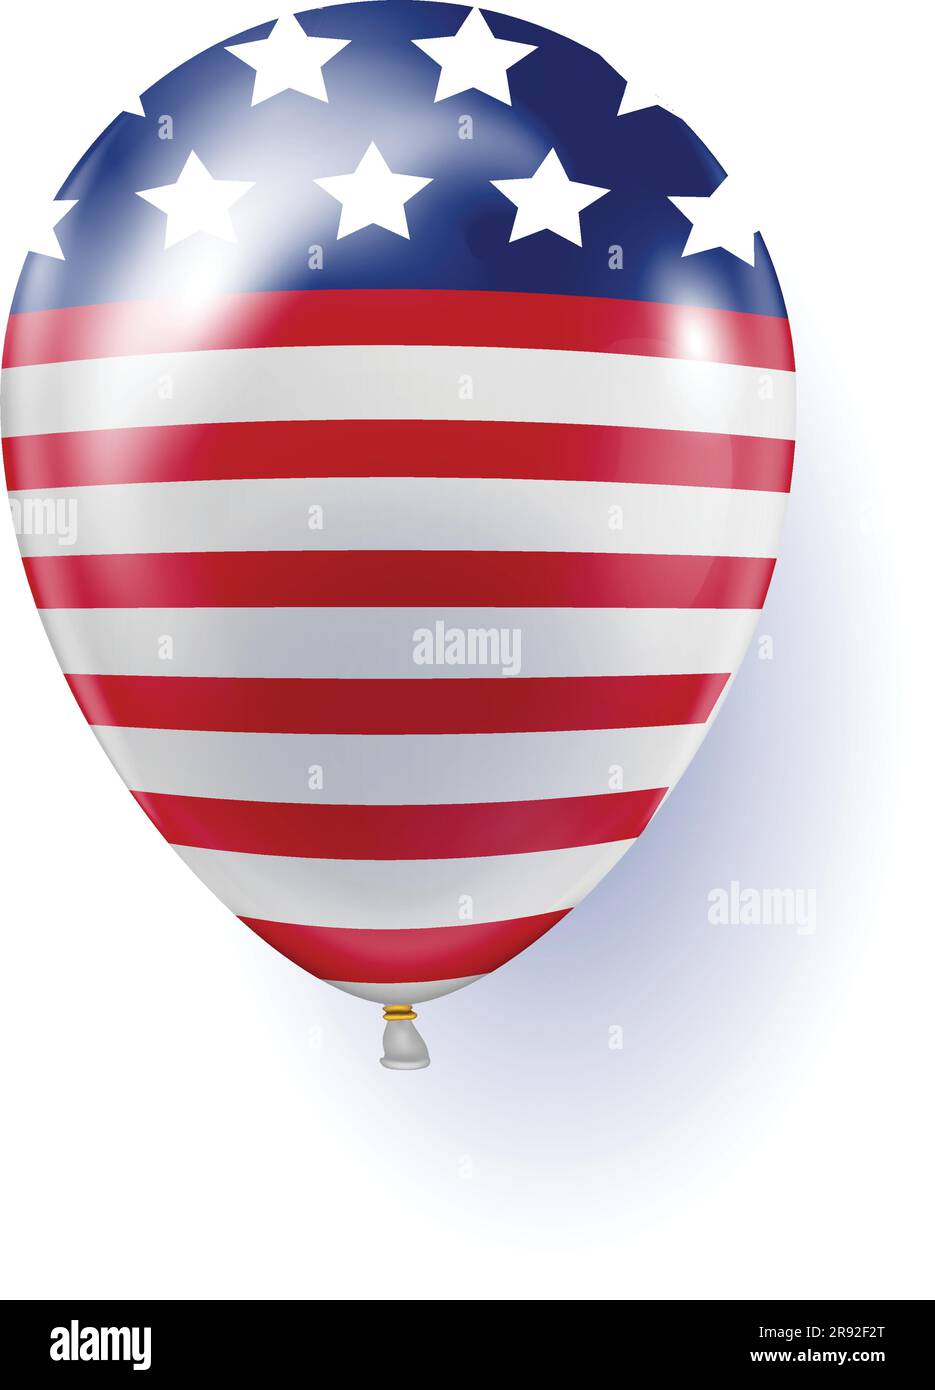 Balloon with red and blue stars USA flag. Stock Vector